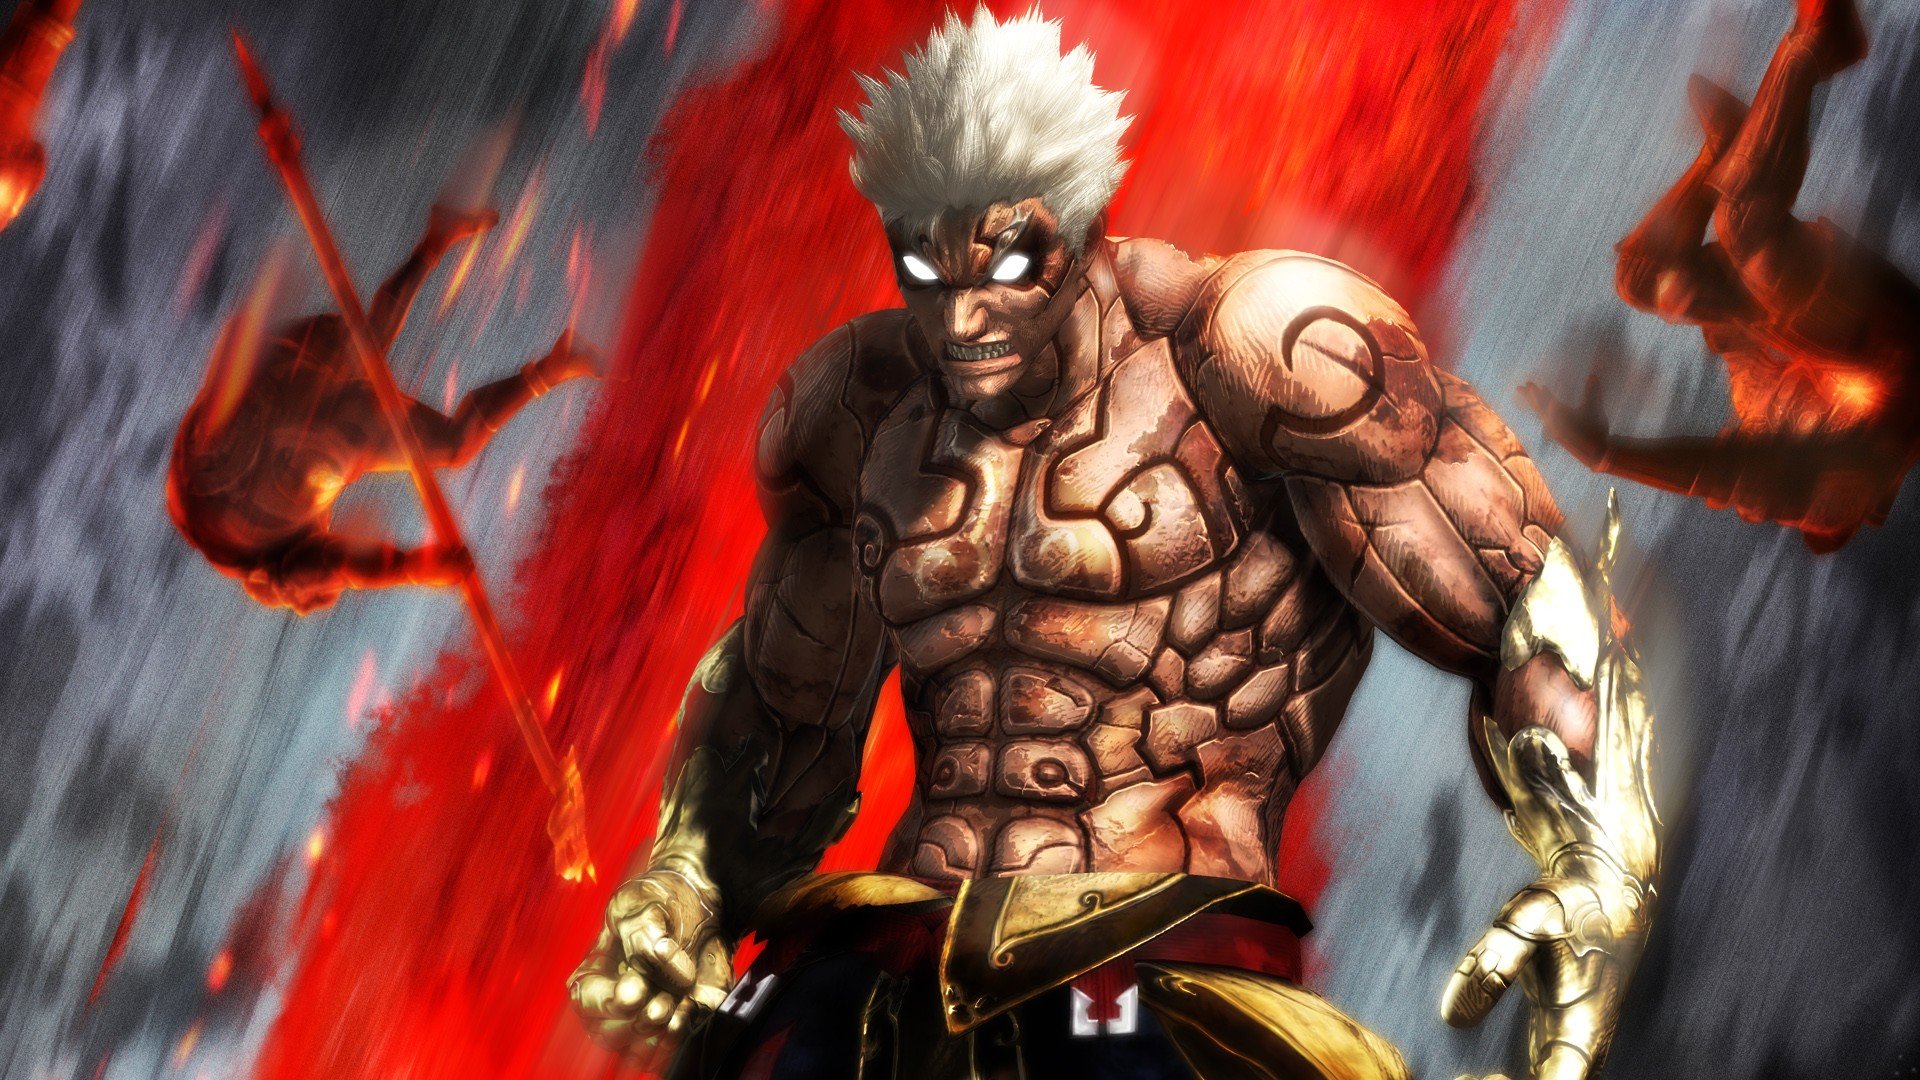 Awesome Asura's Wrath free wallpaper ID:6947 for 1080p computer